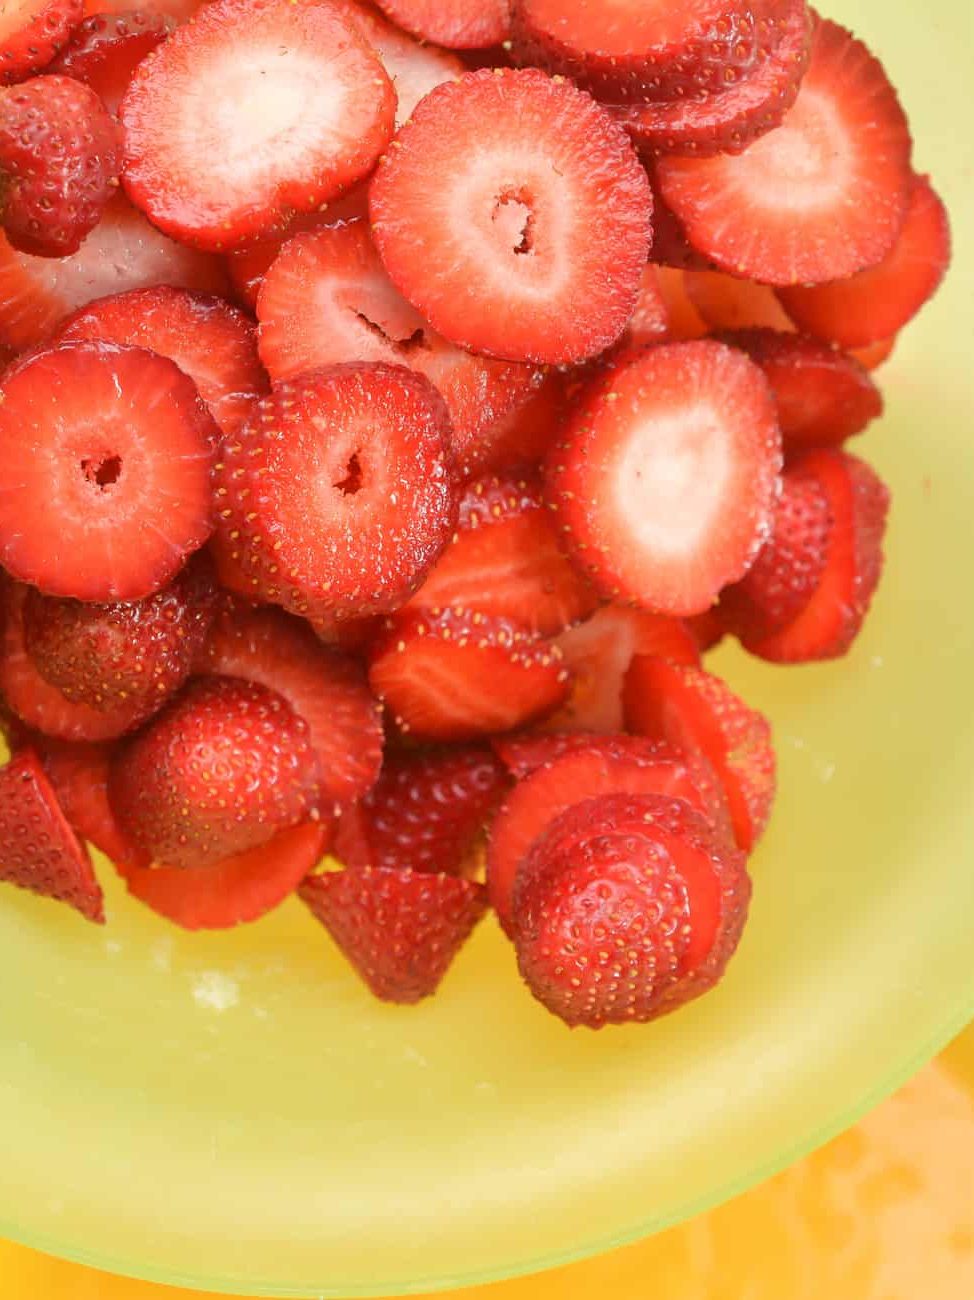 add 1 Pint of strawberries sliced into the mixing bowl.